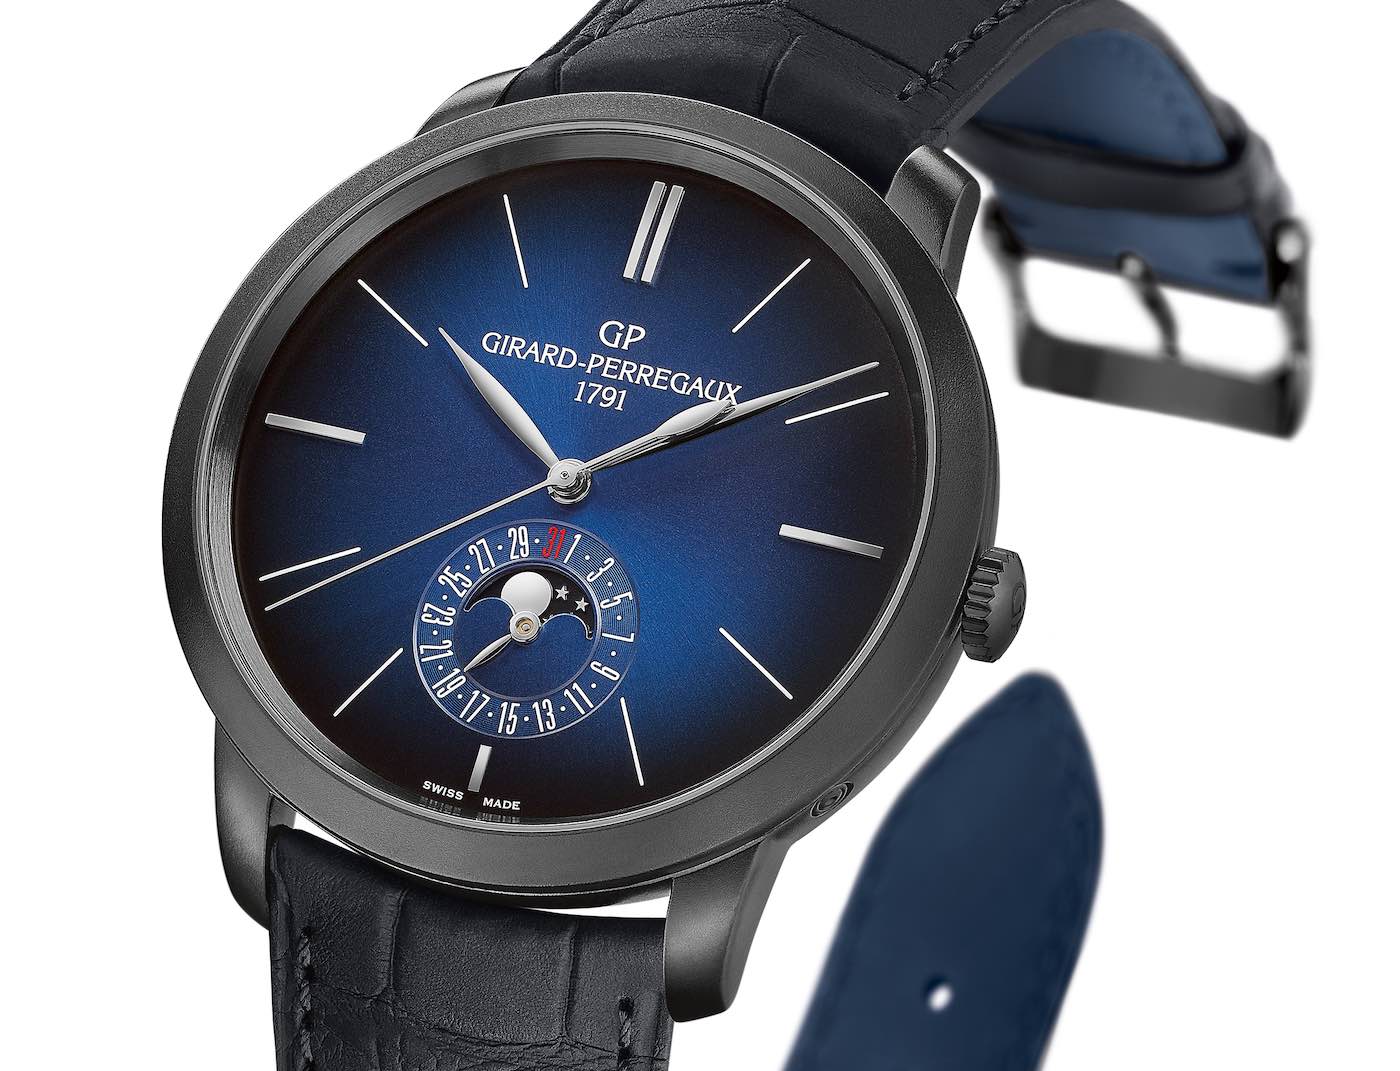 Girard-Perregaux-1966-Blue-Moon-Watch-And-Brand-Ambassador-For-China-Announced